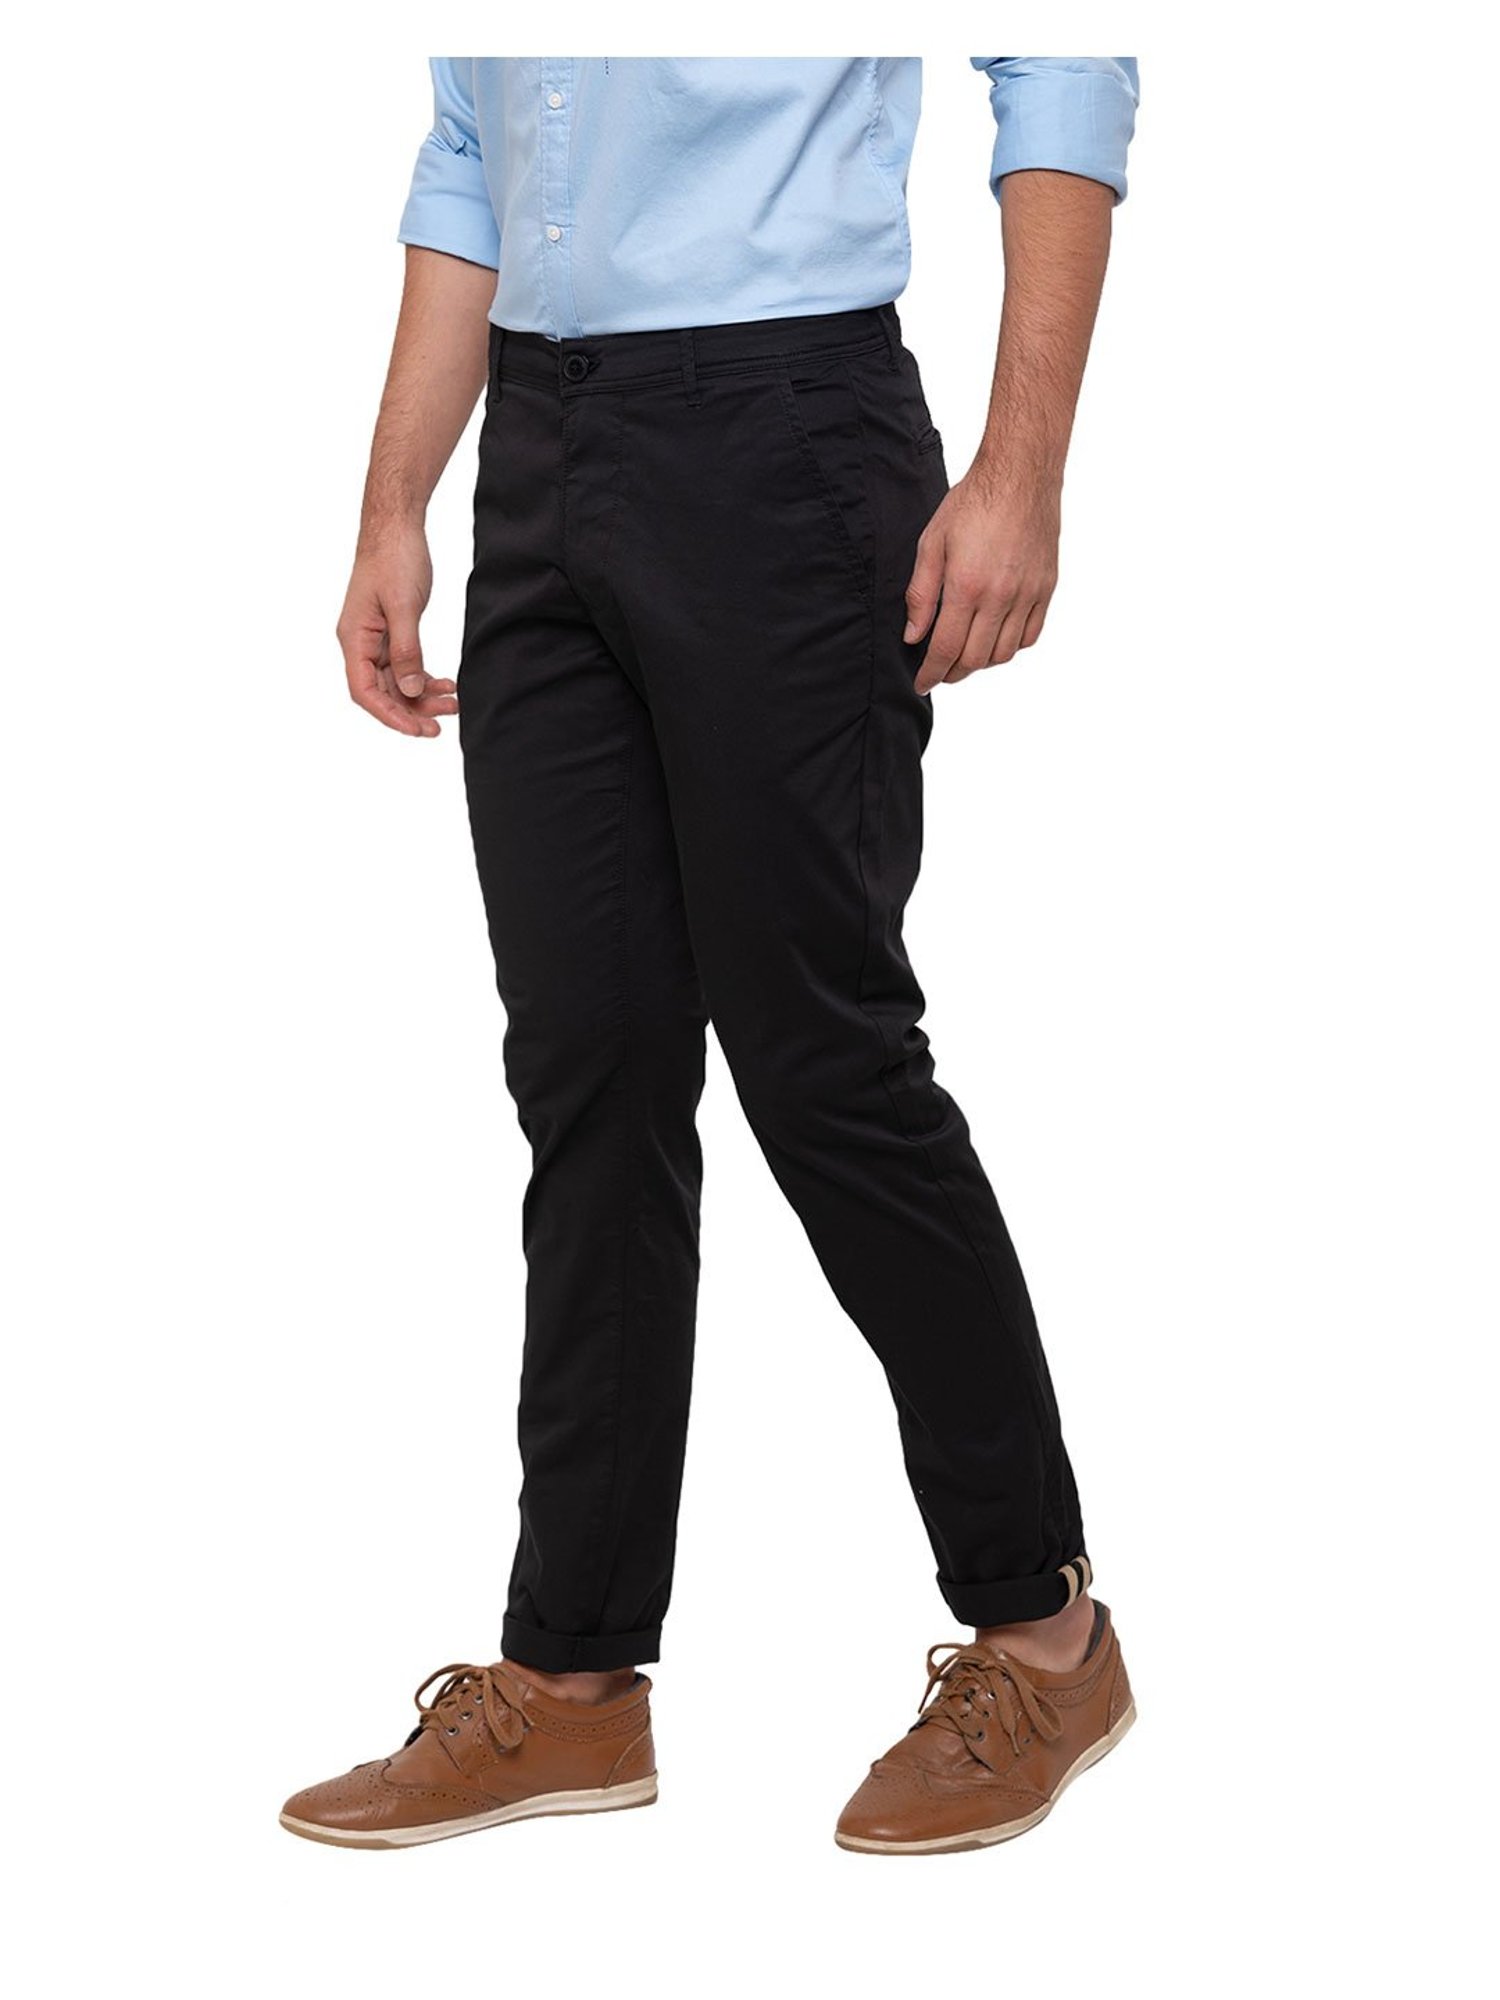 Buy BEING HUMAN Cotton Slim Fit Mens Trousers  Shoppers Stop